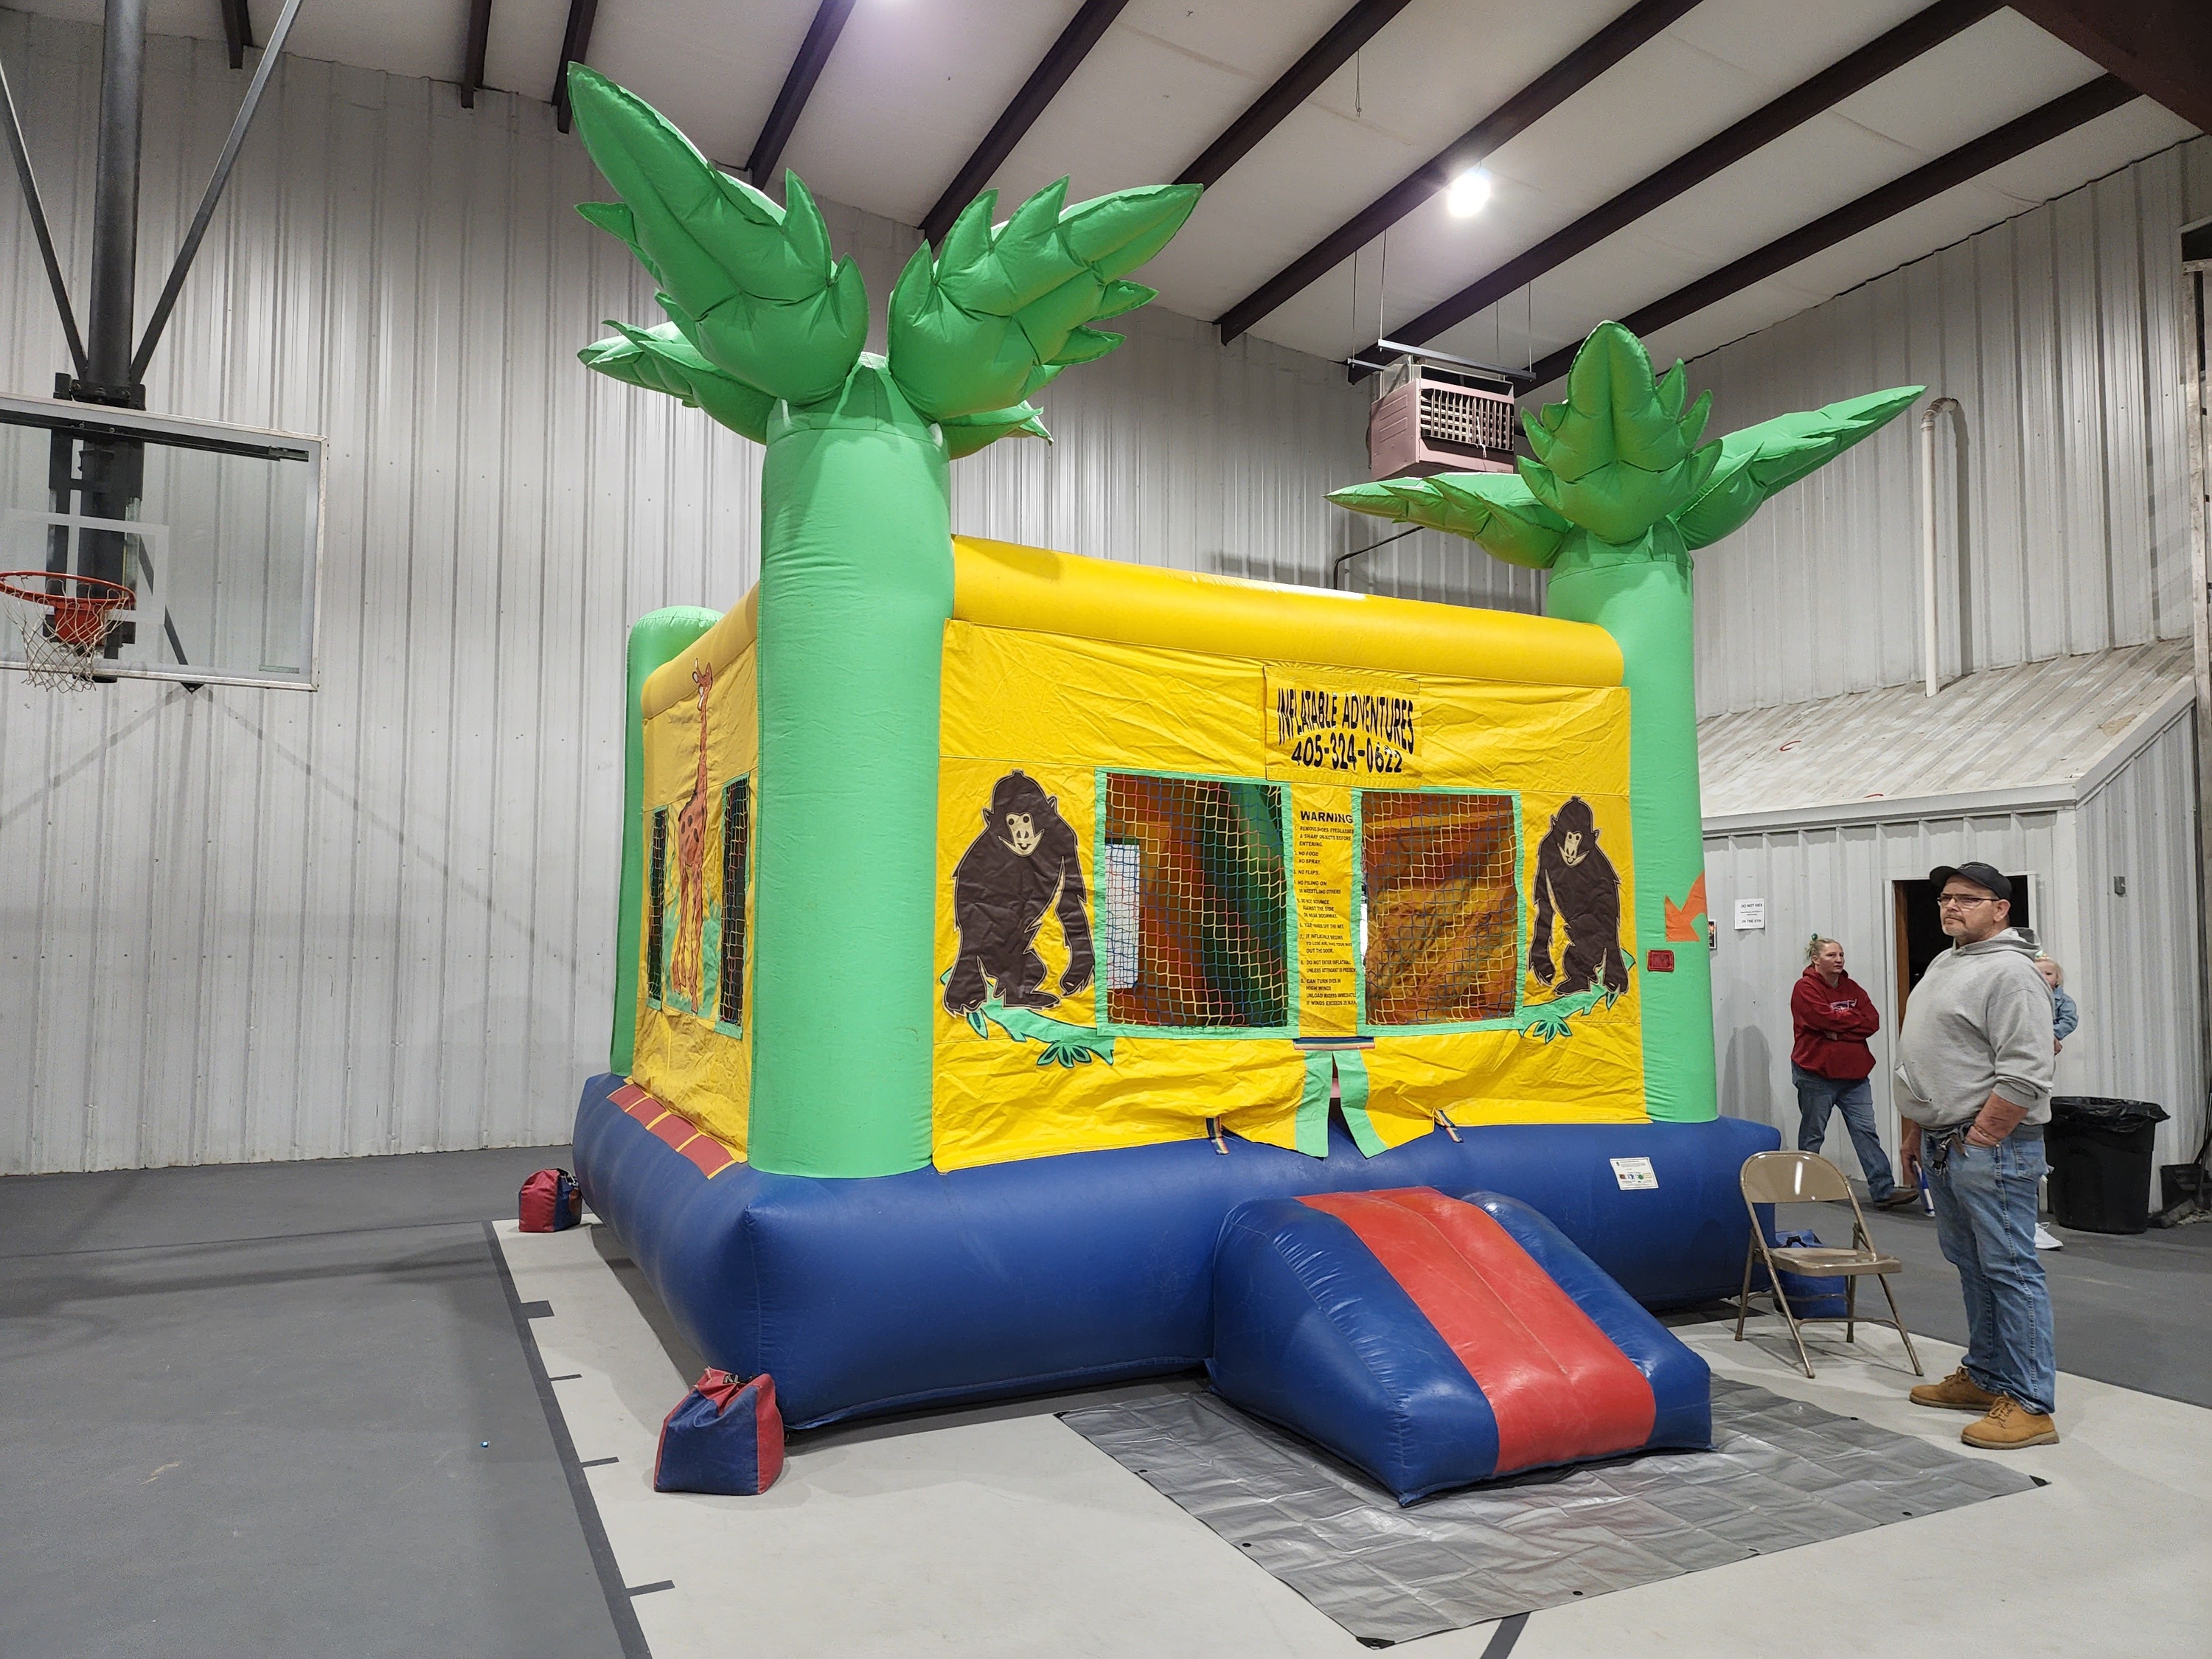 Exciting Options for a Bounce House in Oklahoma City